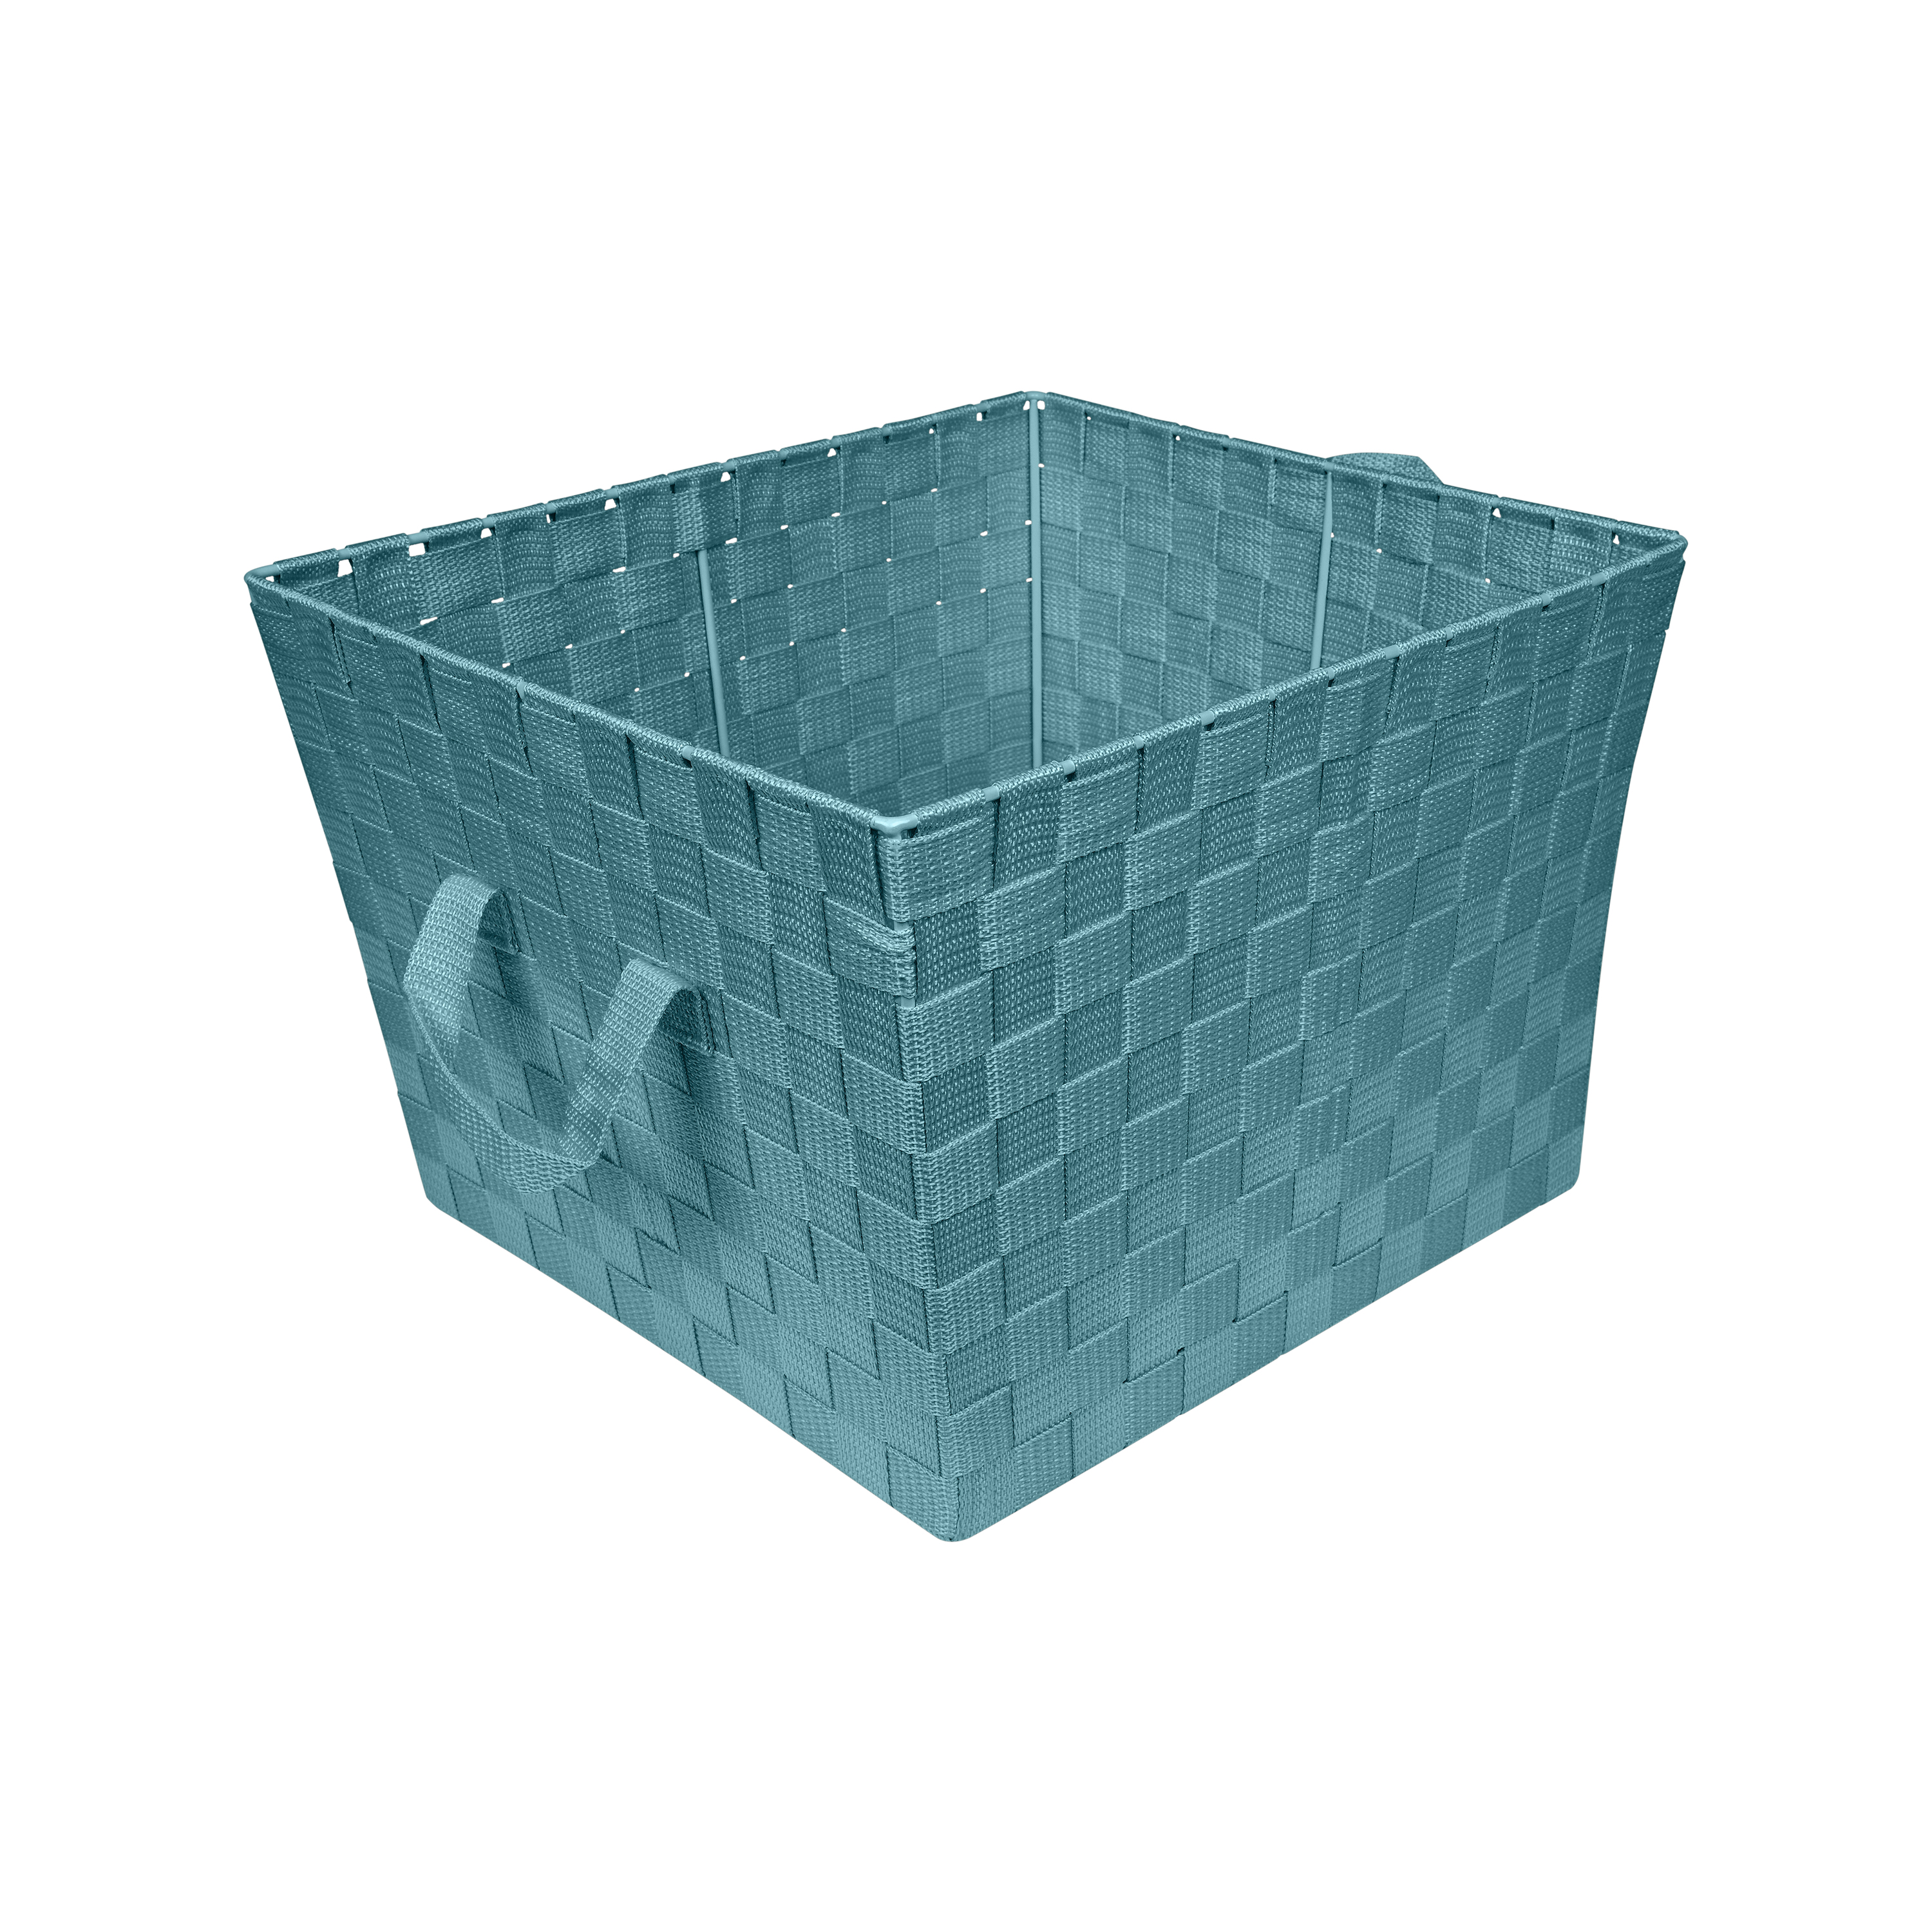 Simplify Large Woven Fabric Storage Basket in Sapphire - image 1 of 8